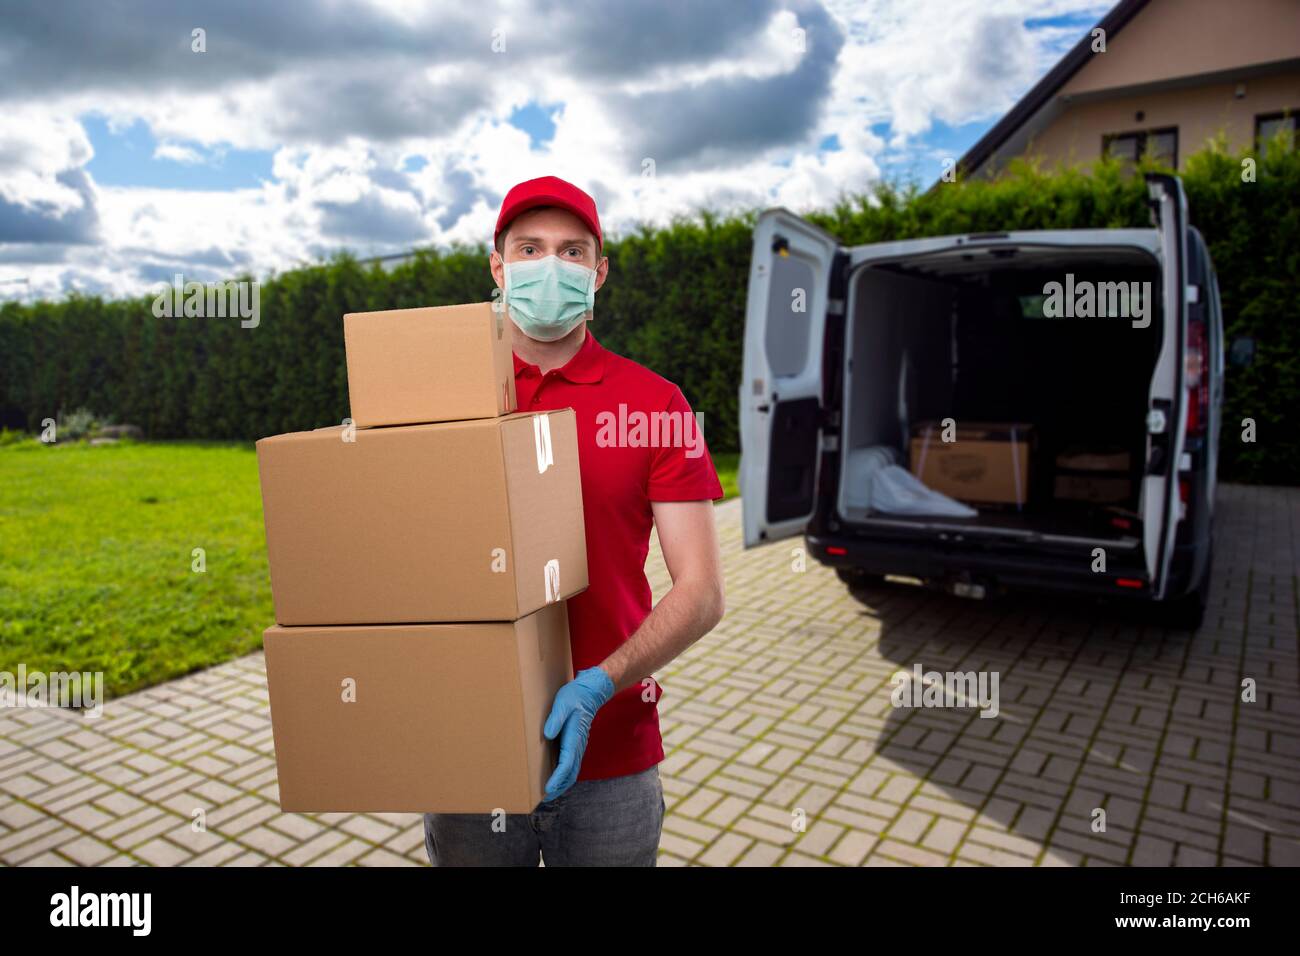 Delivery Man Wearing Medical Mask and Gloves Holding Carton Boxes. Delivery Boy with Boxes in Hands at Delivery Point Stock Photo